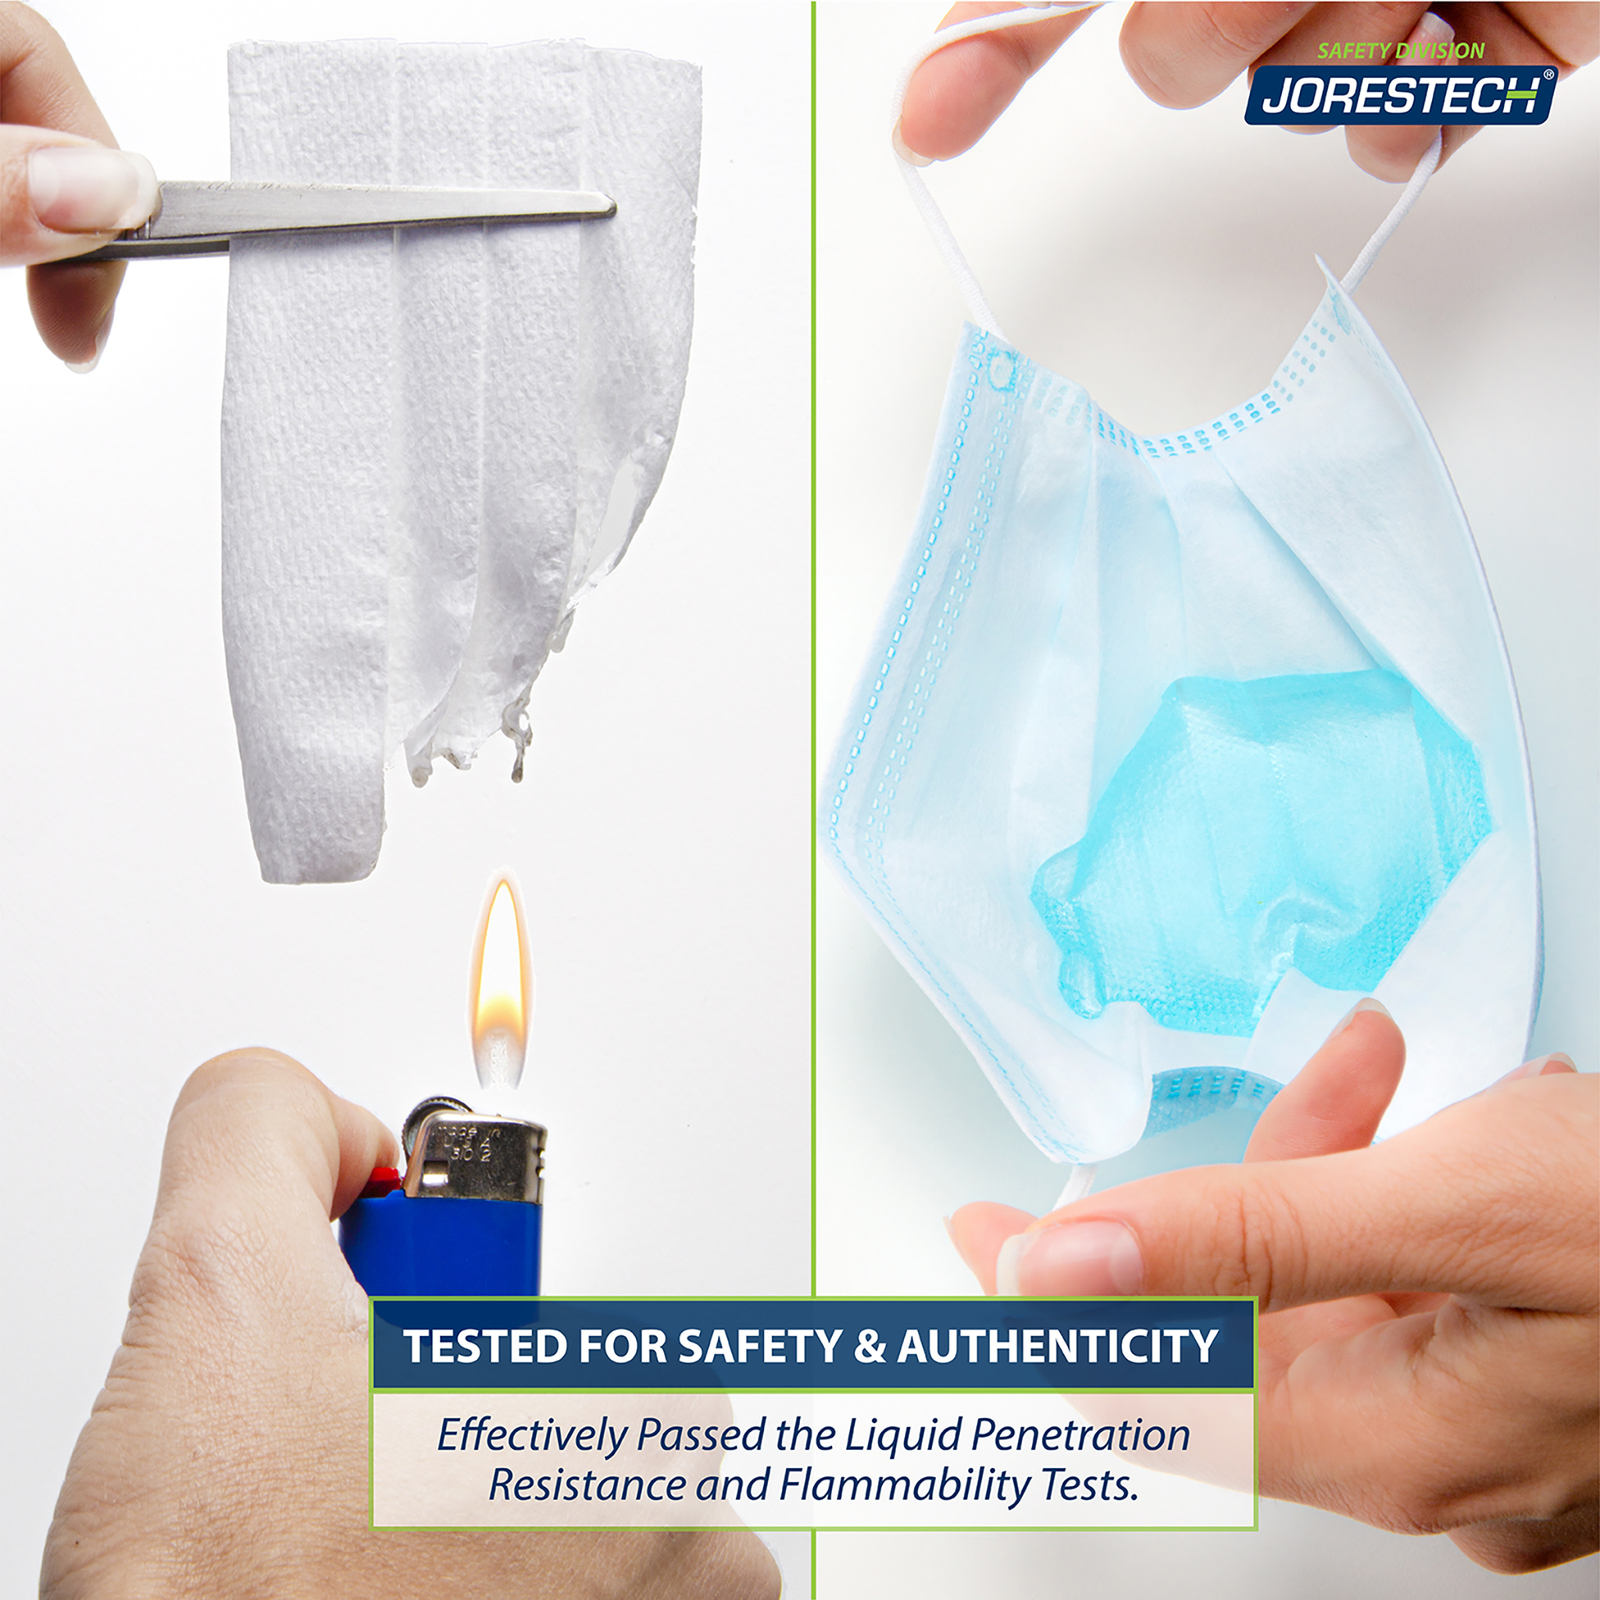 Features he 3 ply safety mask. Text reads: tested for safety & authenticity. Effectively passed the liquid penetration resistance and the flammability tests.